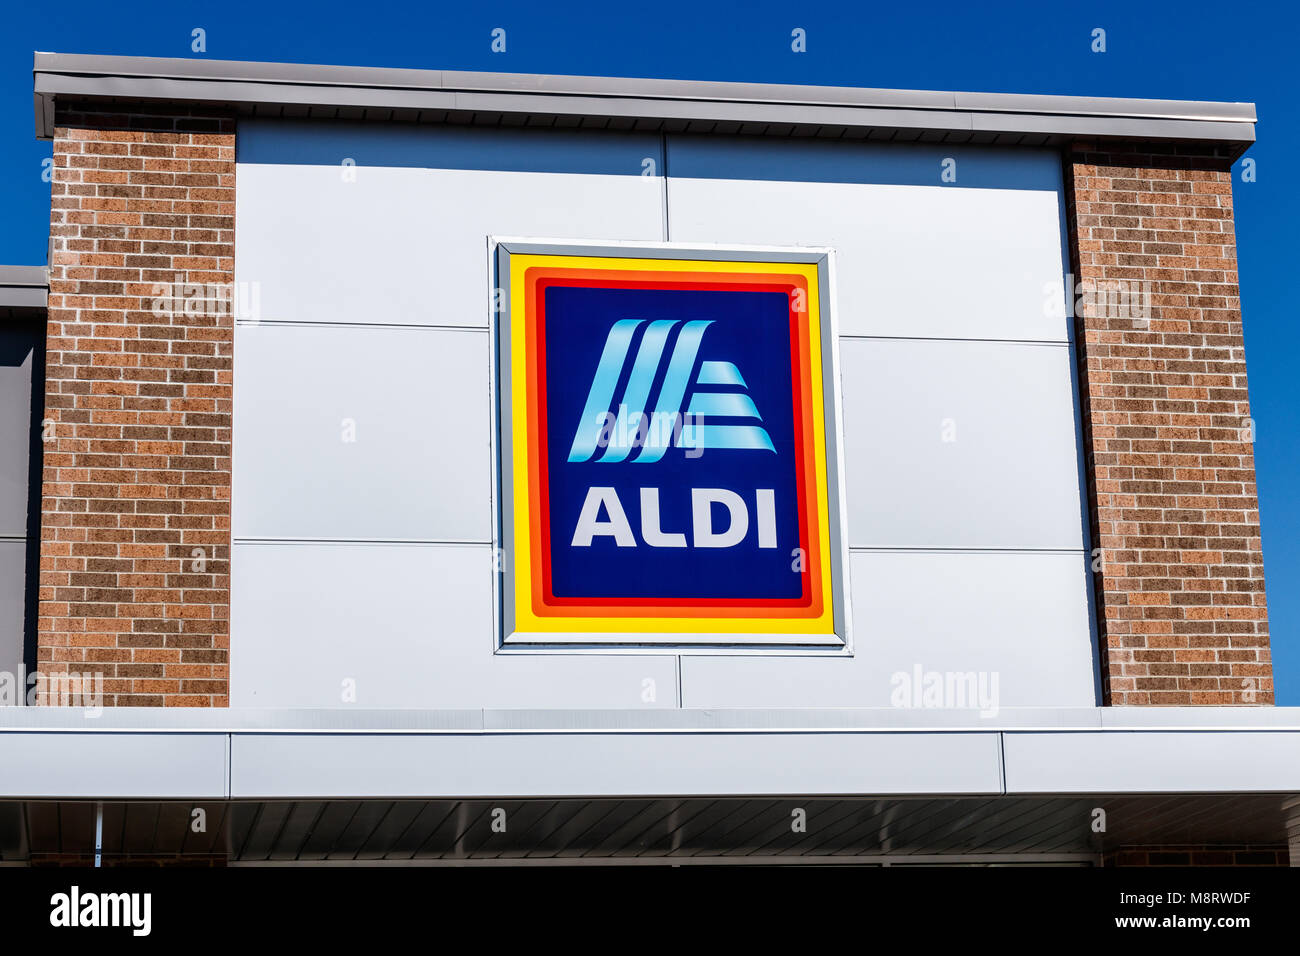 Noblesville - Circa March 2018: Aldi Discount Supermarket. Aldi sells a range of grocery items, including produce, meat & dairy, at discount prices II Stock Photo